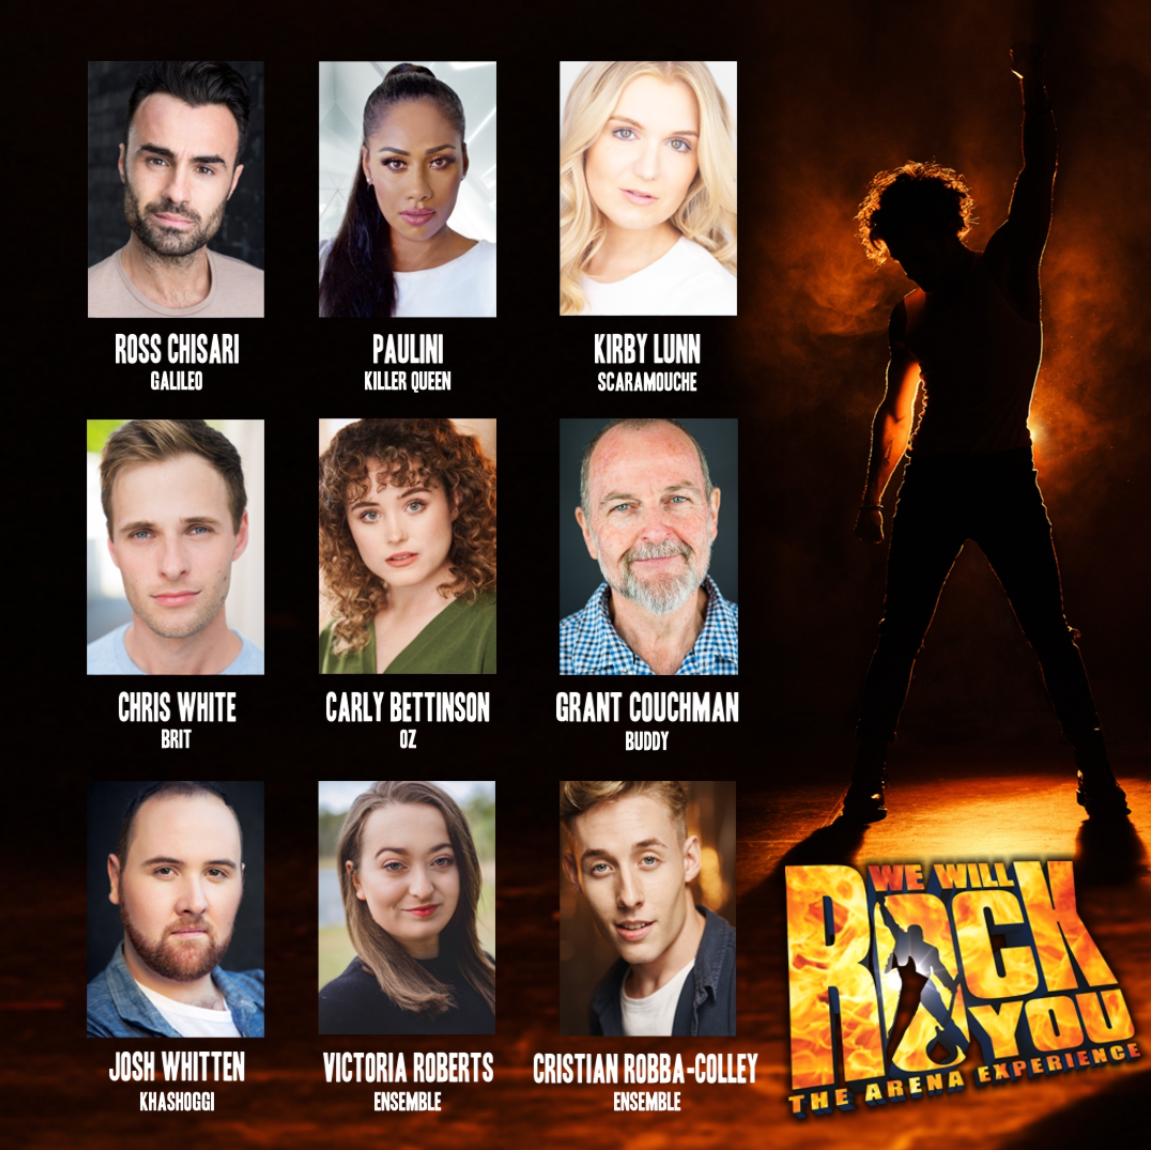 Cast Announcement We will rock you